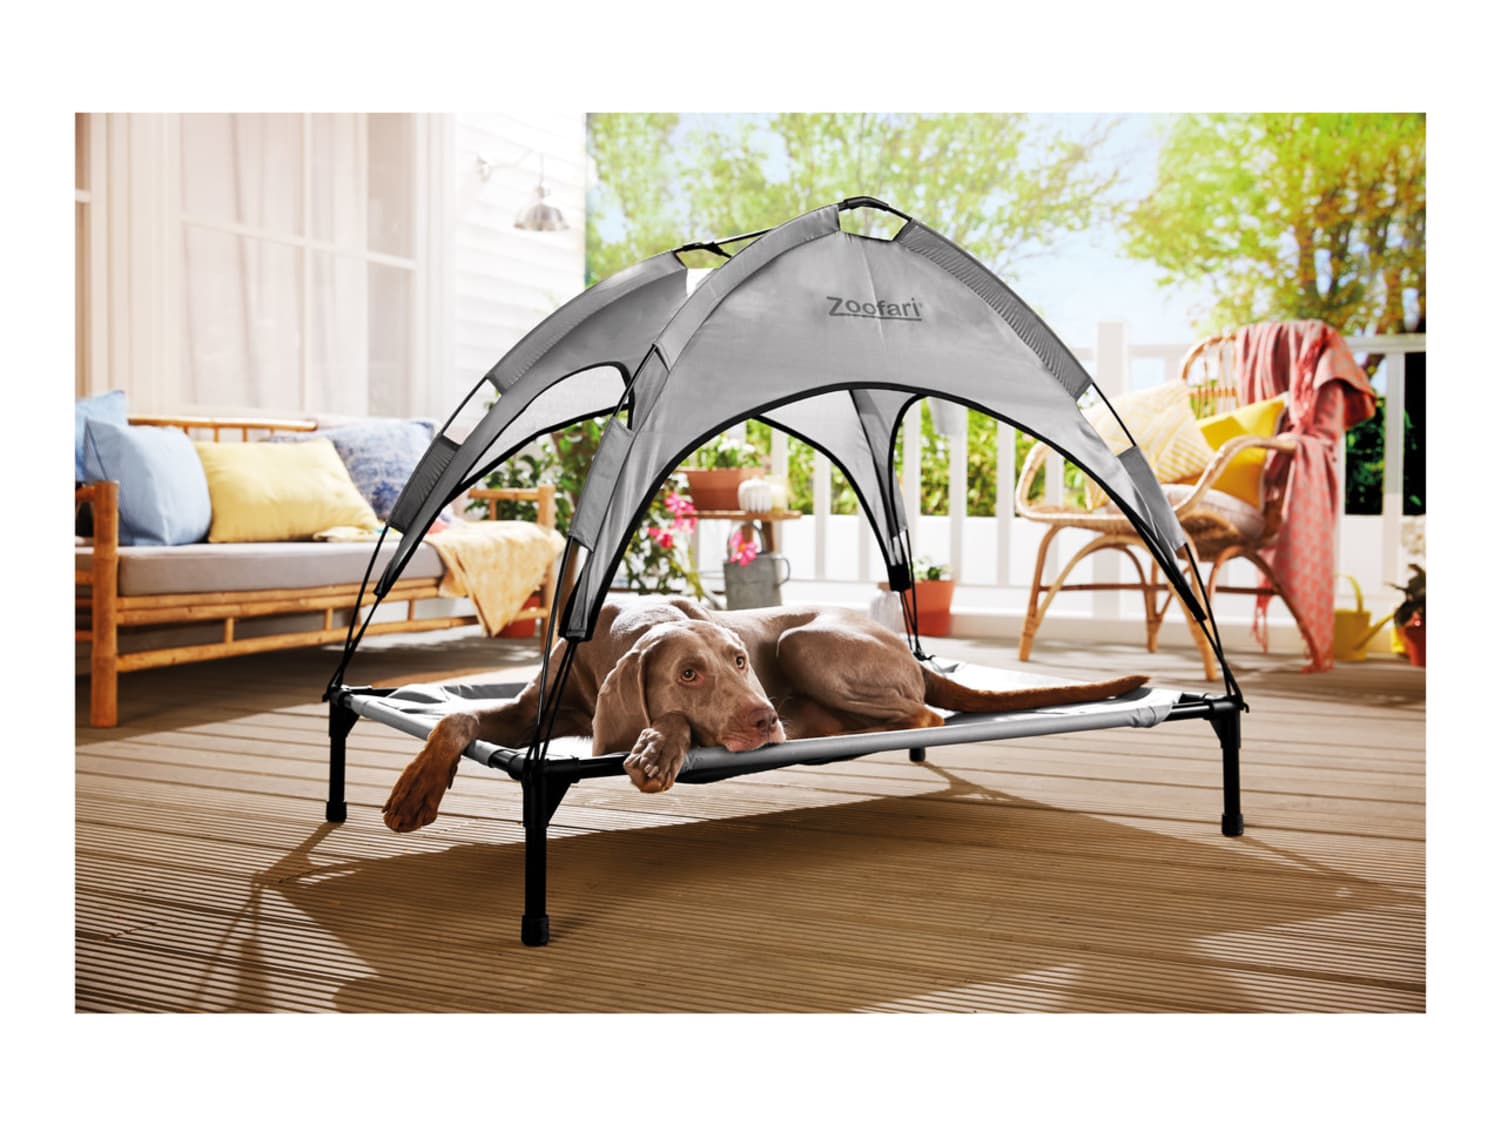 ontwerper Weggegooid In zicht Lidl Is Selling a Dog Bed with a Sun Shade | Apartment Therapy